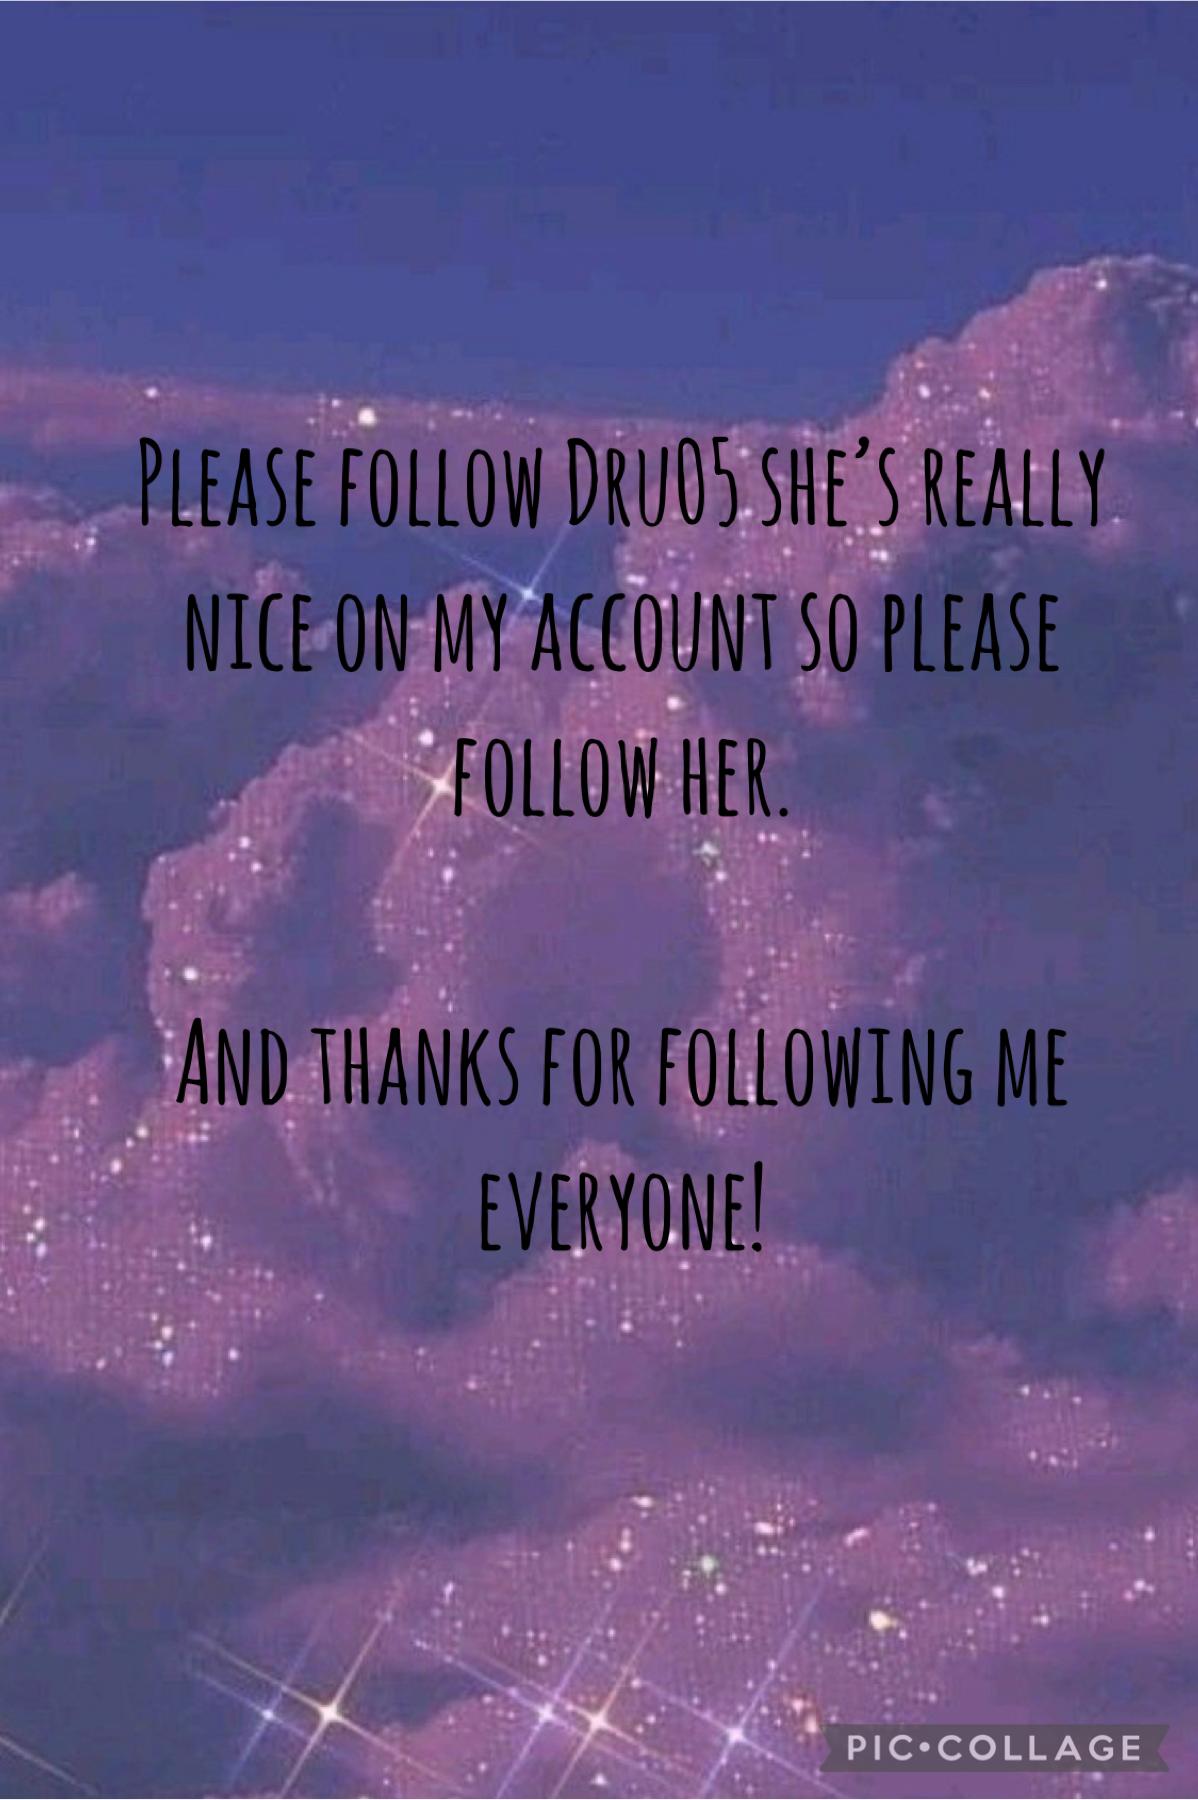 Please go follow her she is new on PICCOLLAGE. 